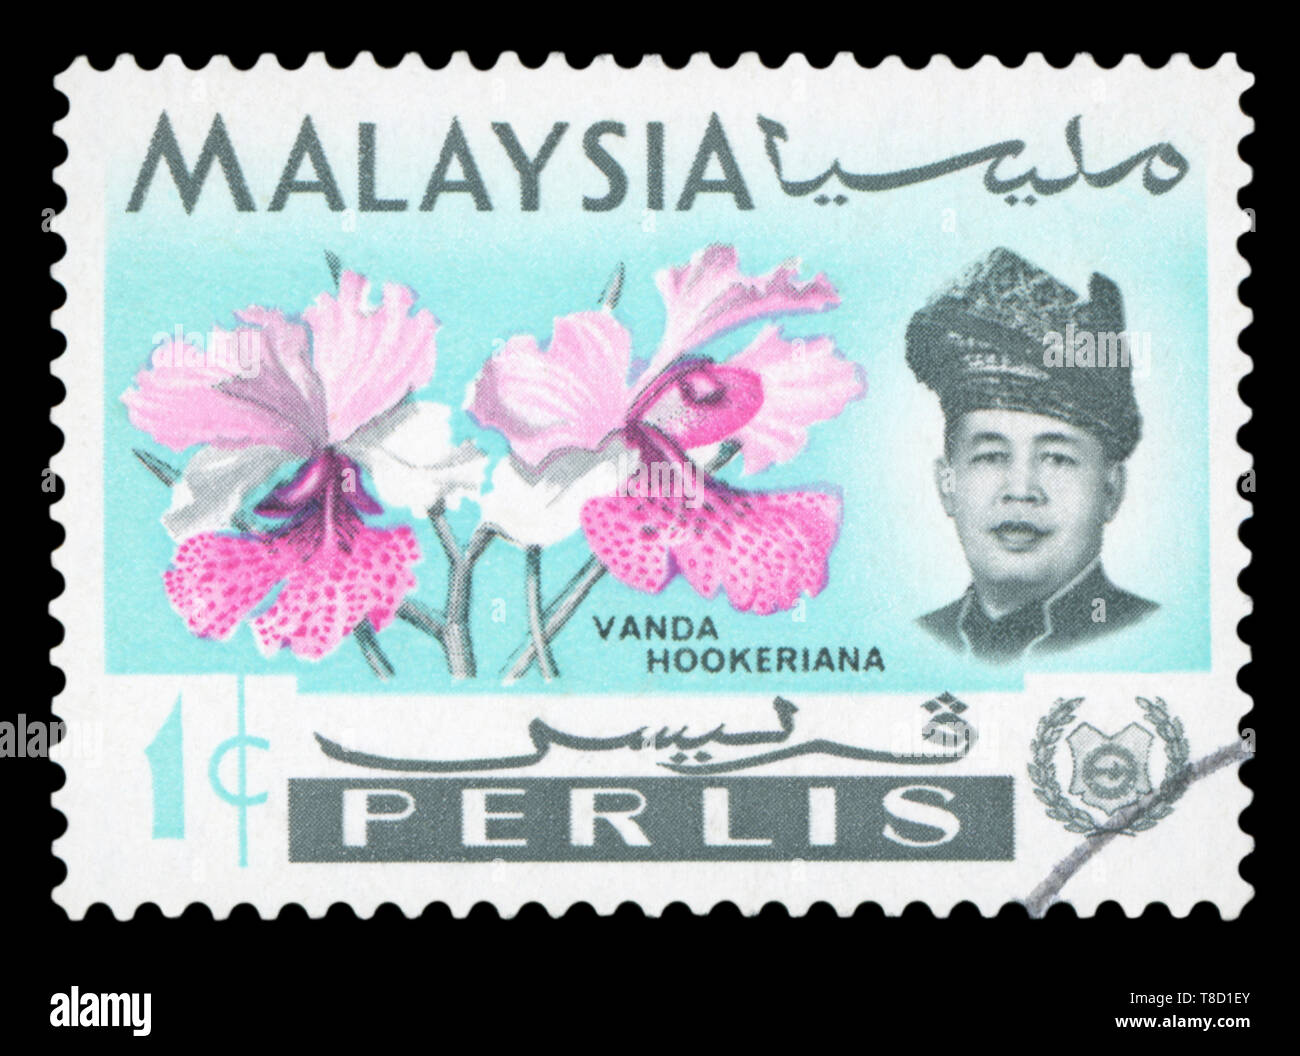 MALAYSIA - CIRCA 1965: A stamp printed in Negeri Sembilan state of Malaysia shows Vanda Hookeriana is a species of orchid and coat of arms, circa 1965 Stock Photo